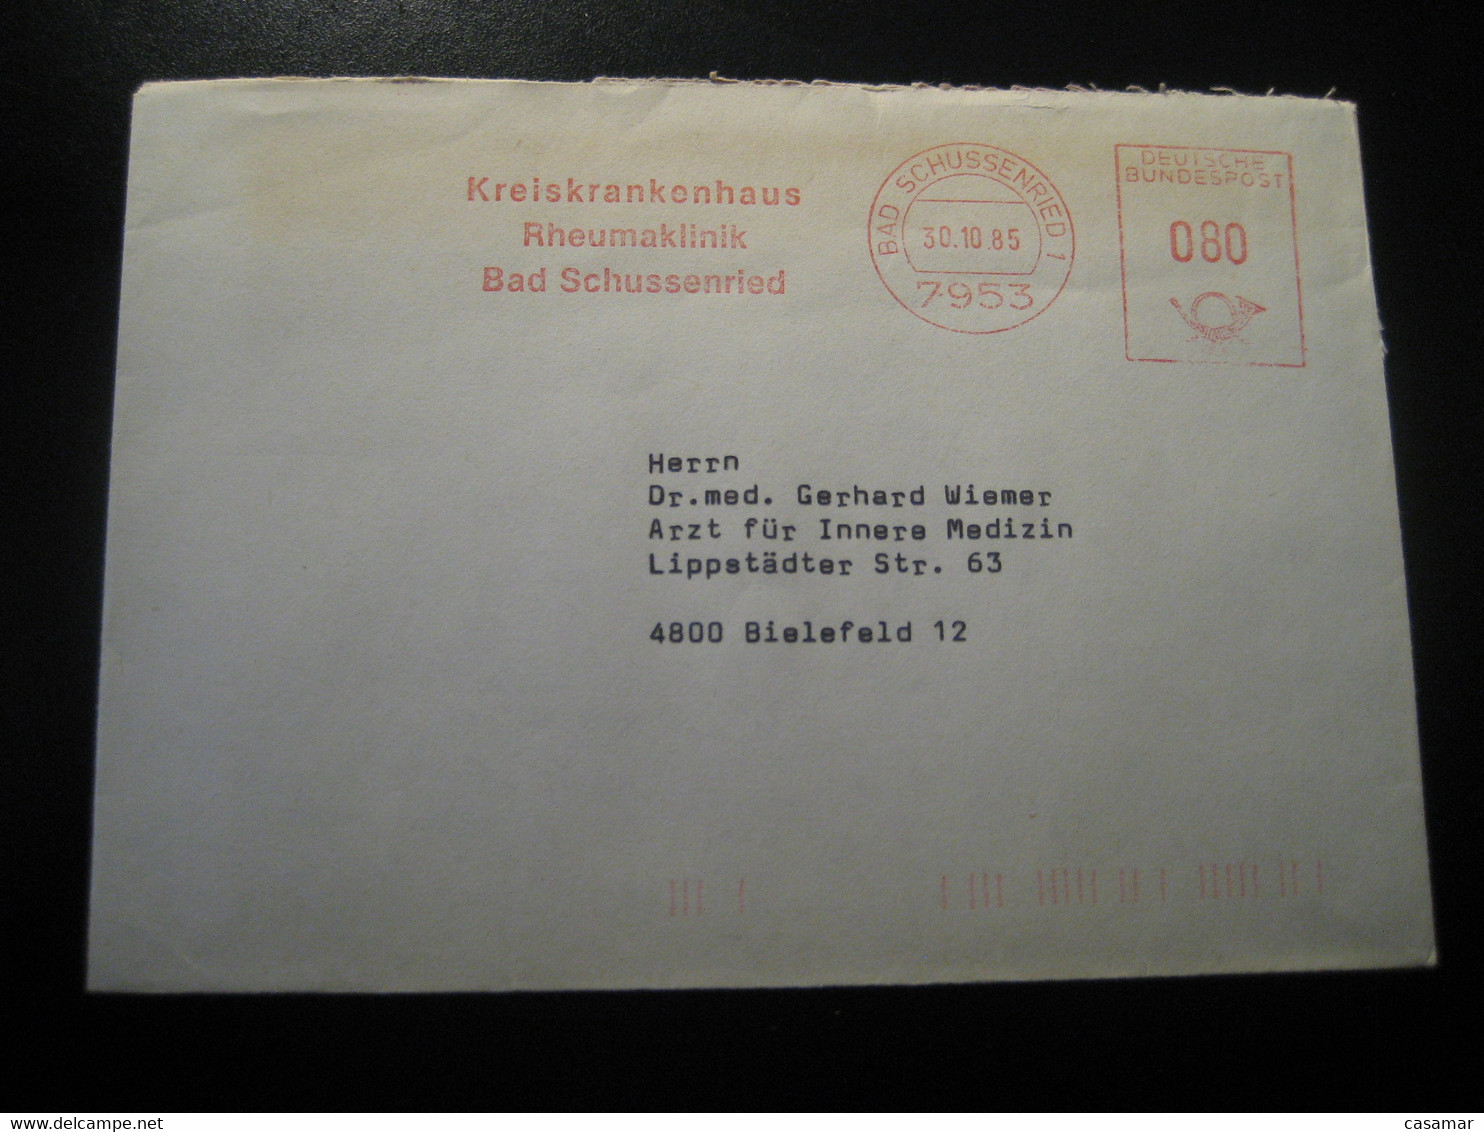 BAD SCHUSSENRIED 1985 Rheumatism Rhumatisme Clinic Hospital Clinique Thermal Health Meter Mail Cancel Cover GERMANY - Kuurwezen